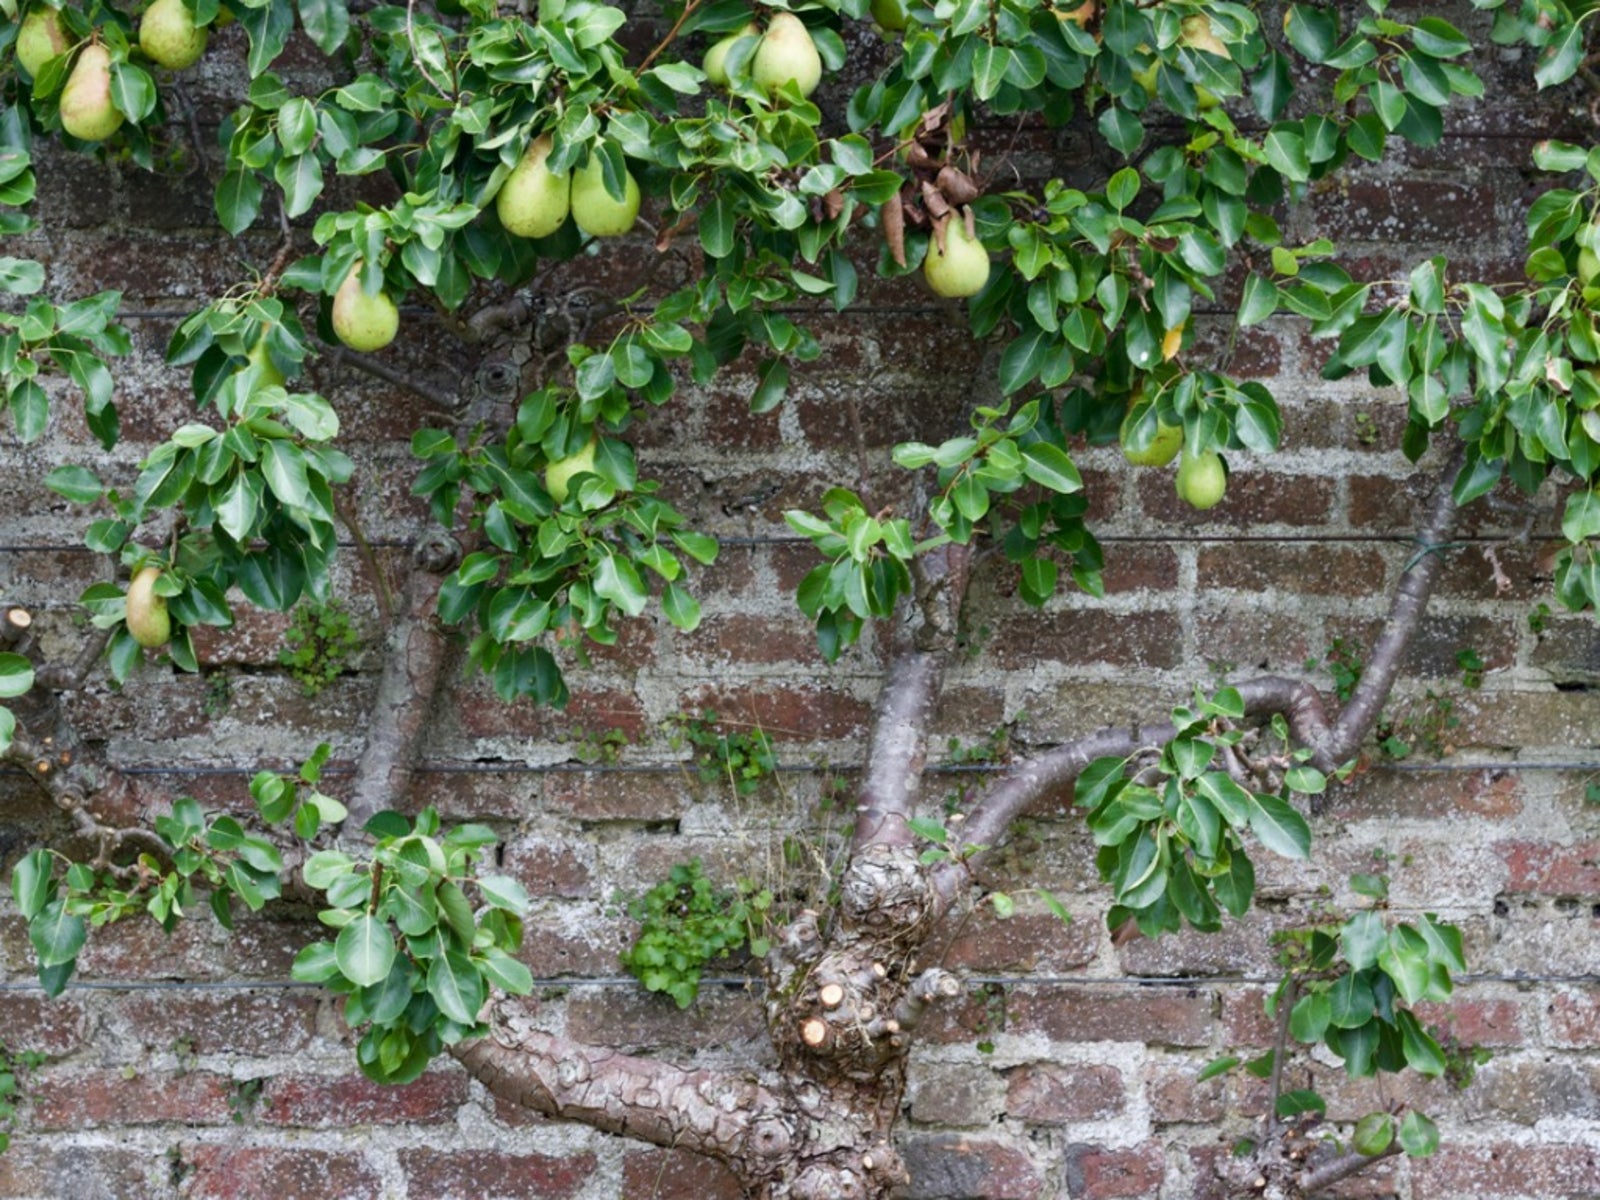 How to care for pear tree